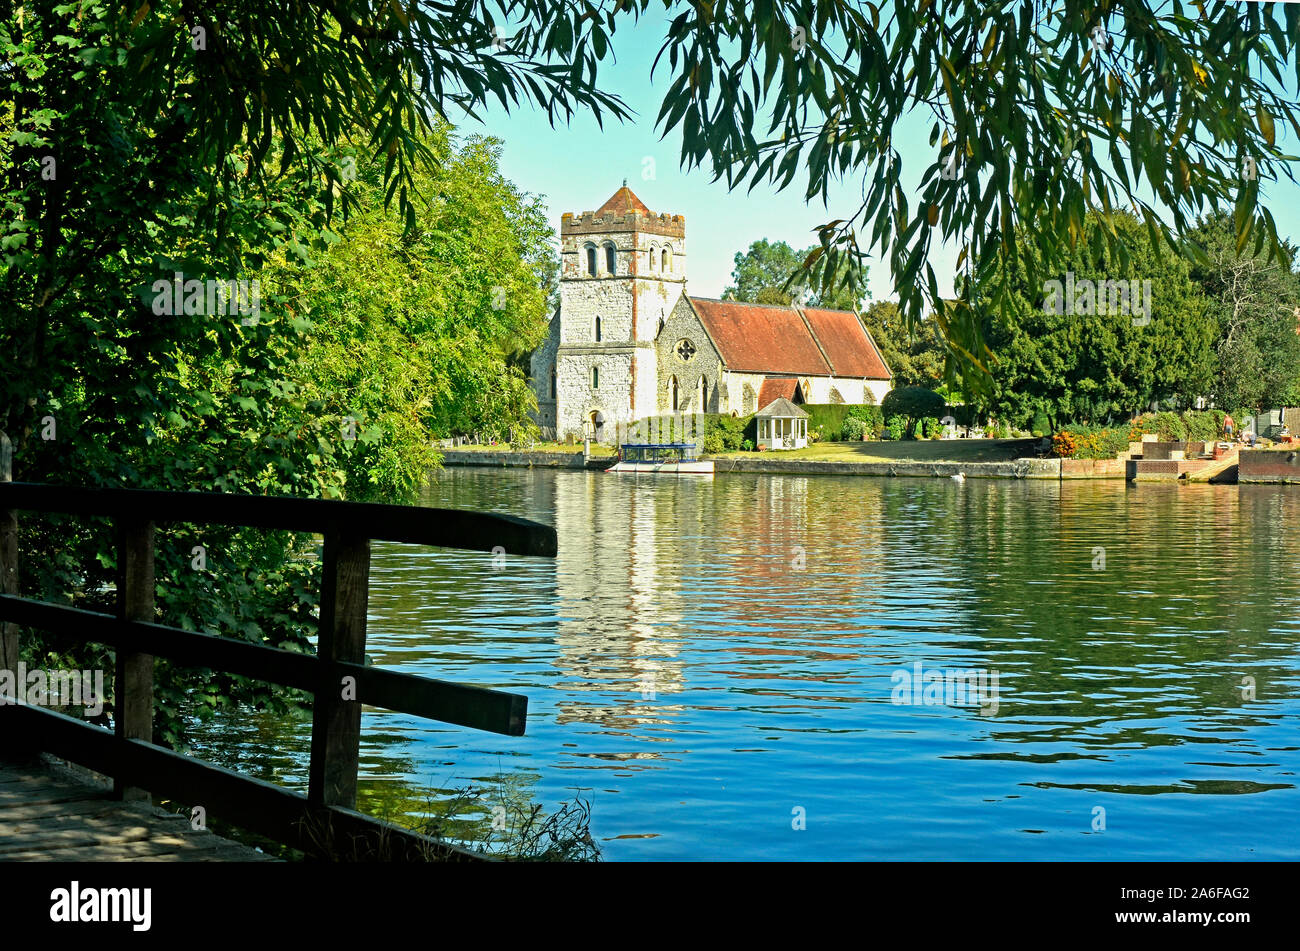 Berkshire - river Thames - Bisham church- summer day - reflections - sunlight - blue sky - tranquil - picturesque Stock Photo